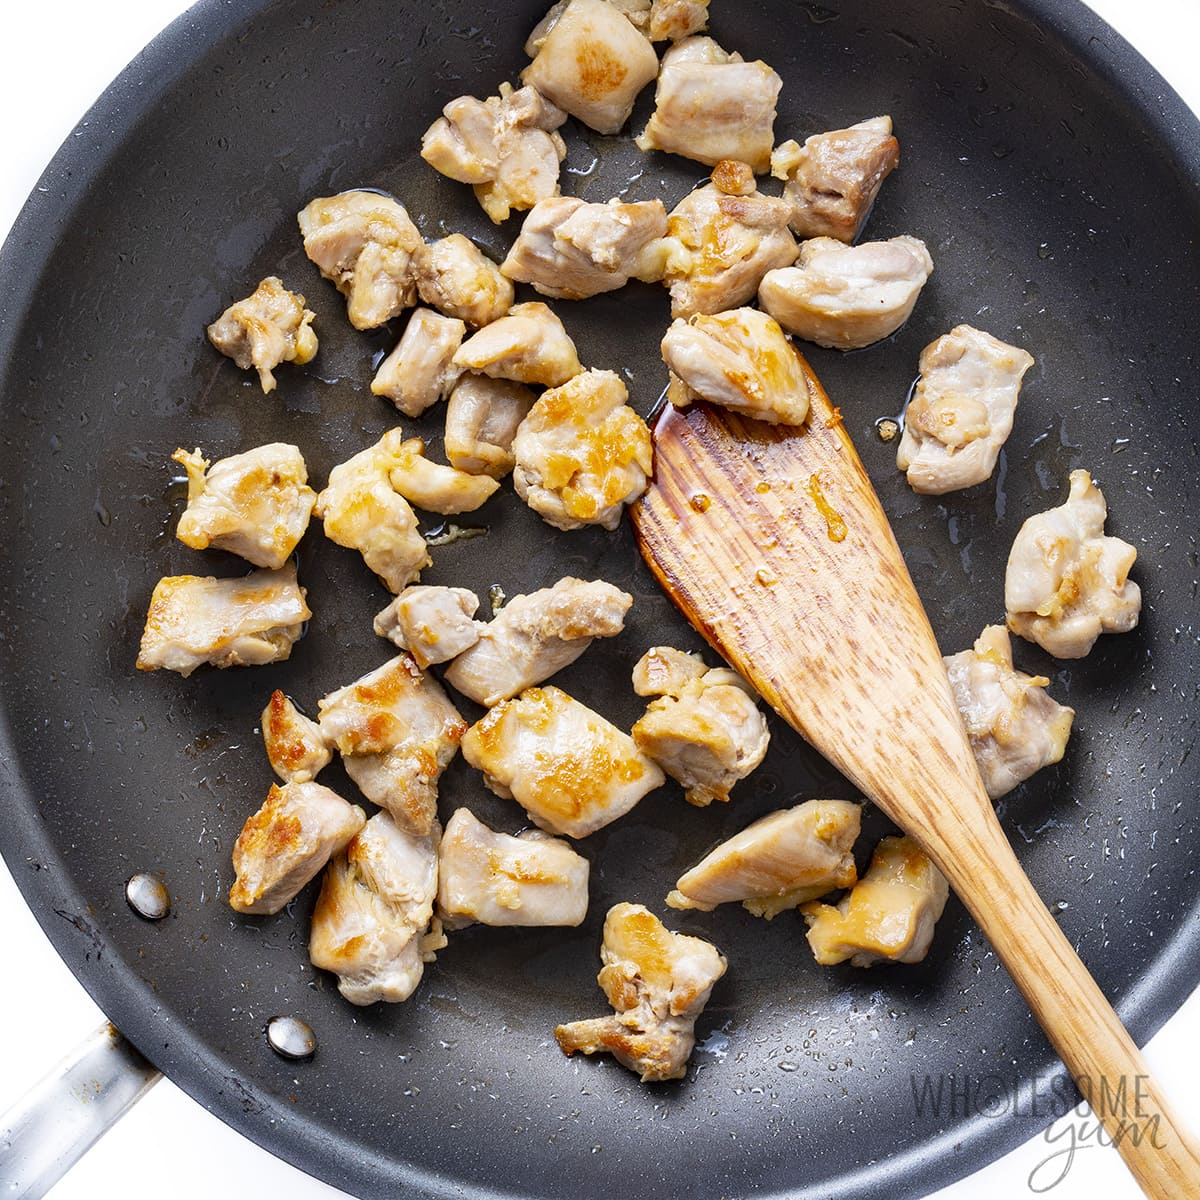 Cooked chicken pieces in a large skillet.